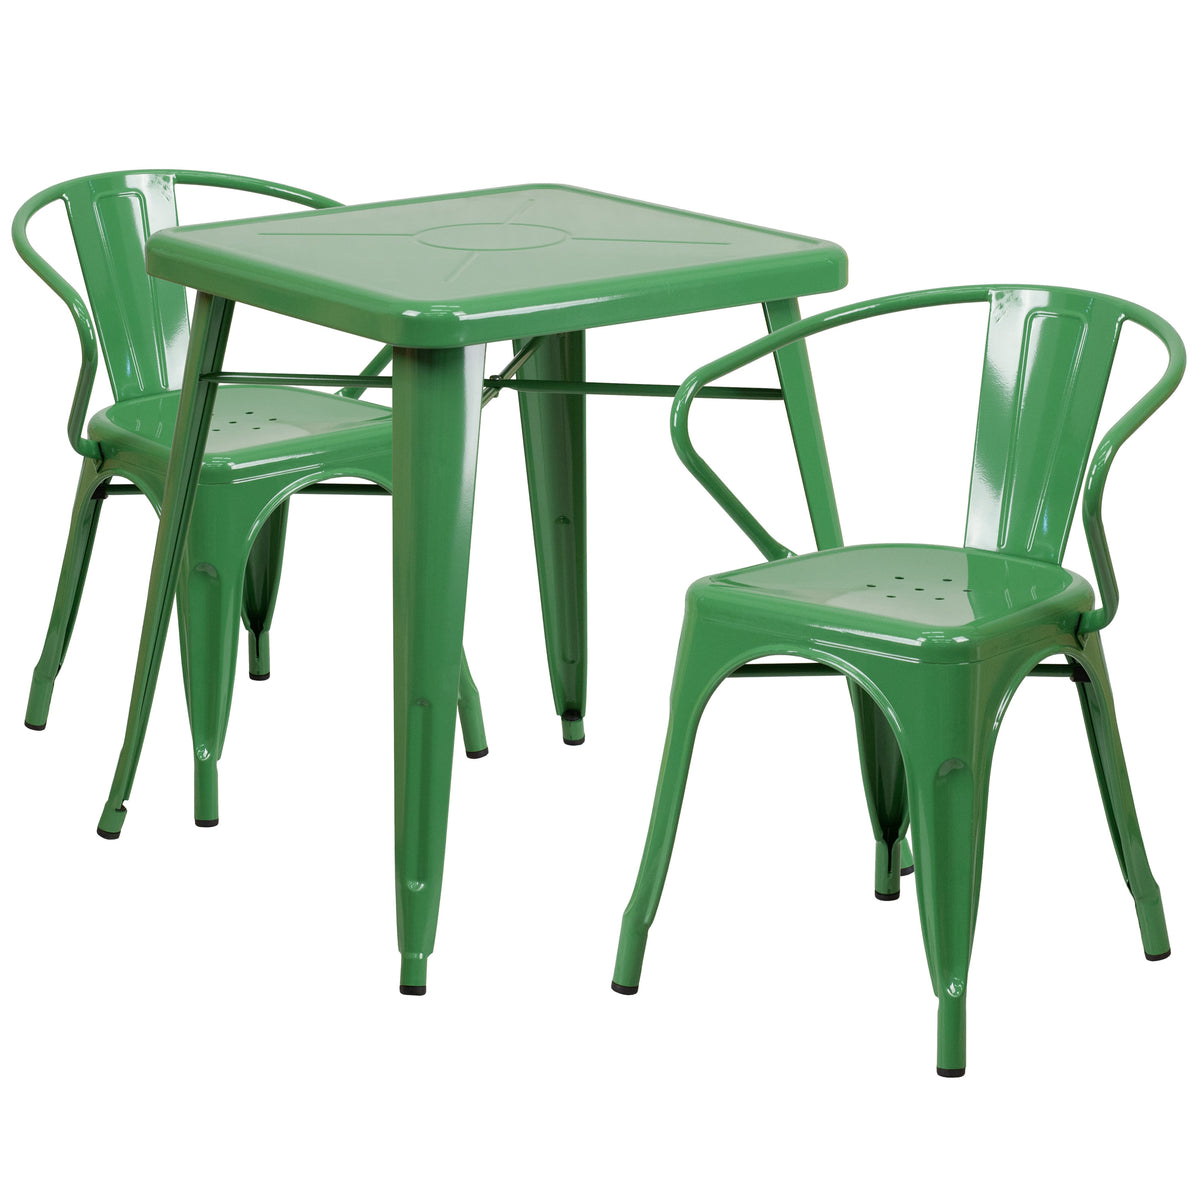 Green |#| 23.75inch Square Green Metal Indoor-Outdoor Table Set with 2 Arm Chairs